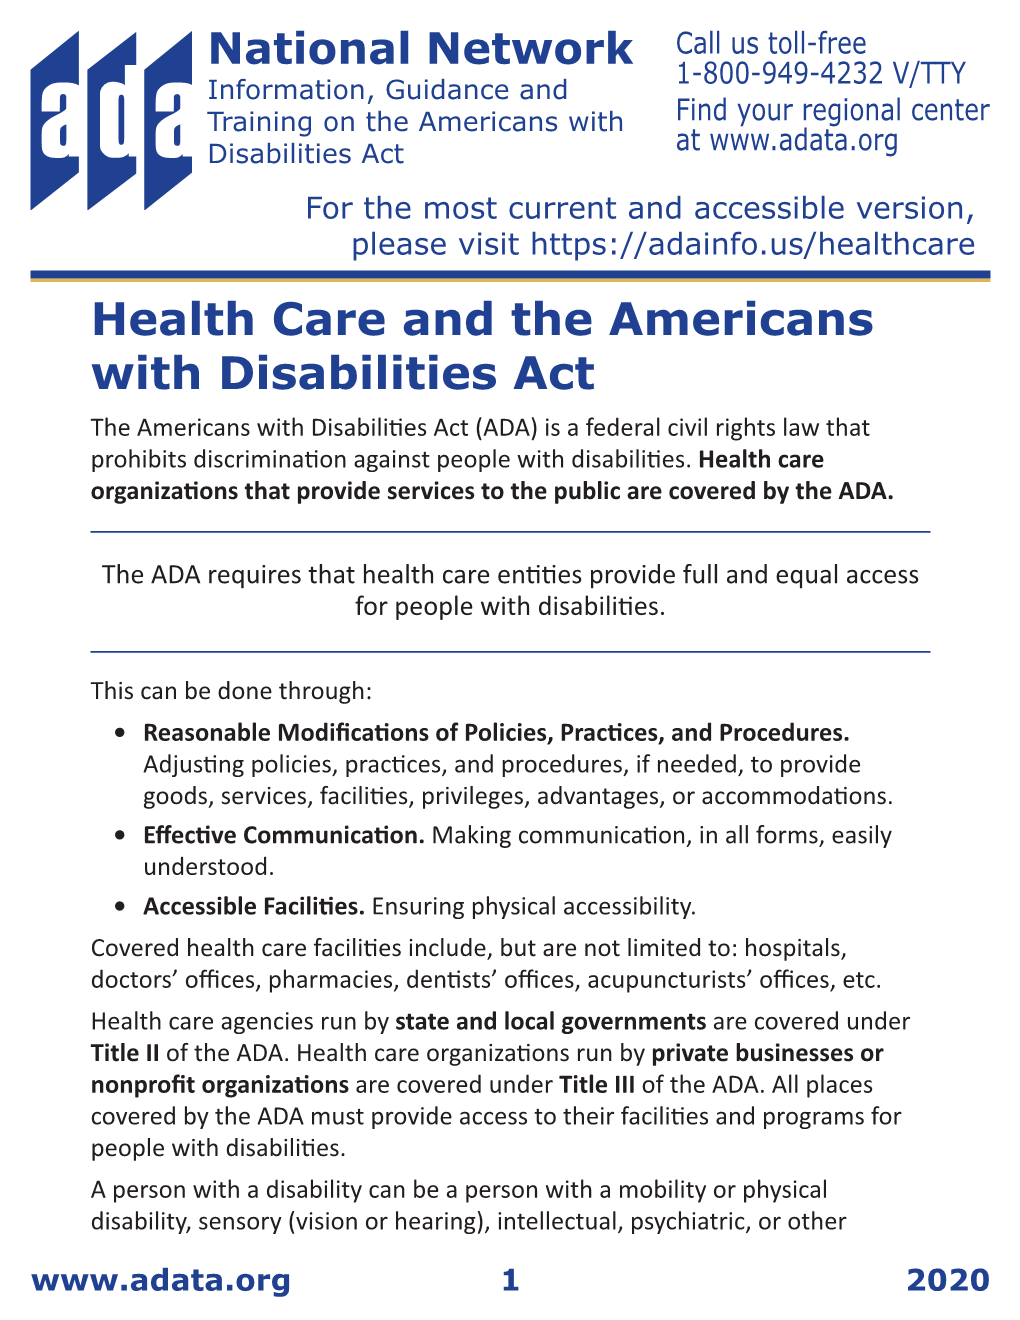 Health Care and the Americans with Disabilities Act, Large Print